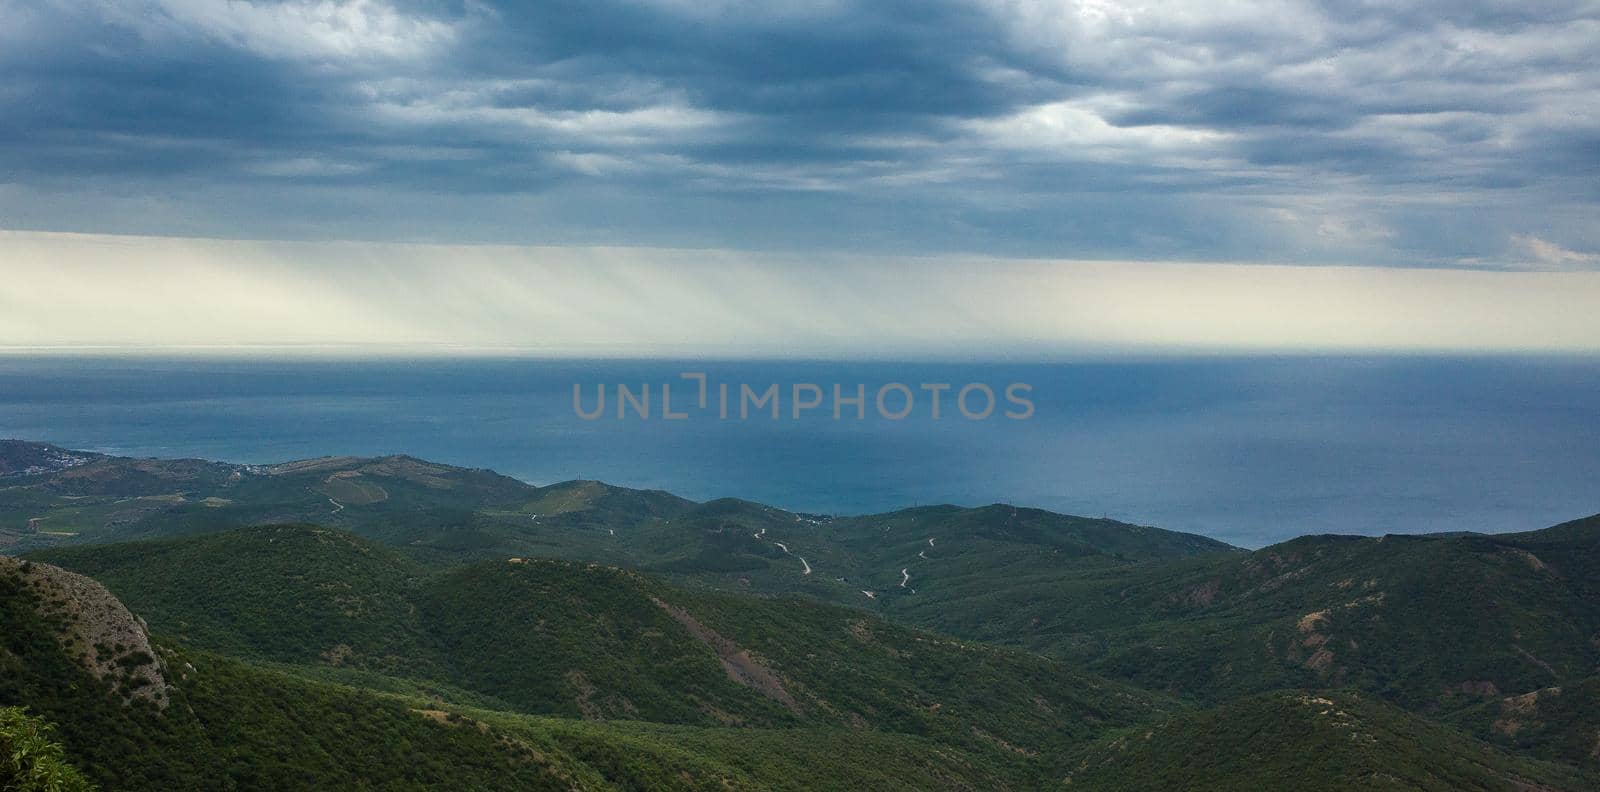 landscapes of the Crimea peninsula by fifg